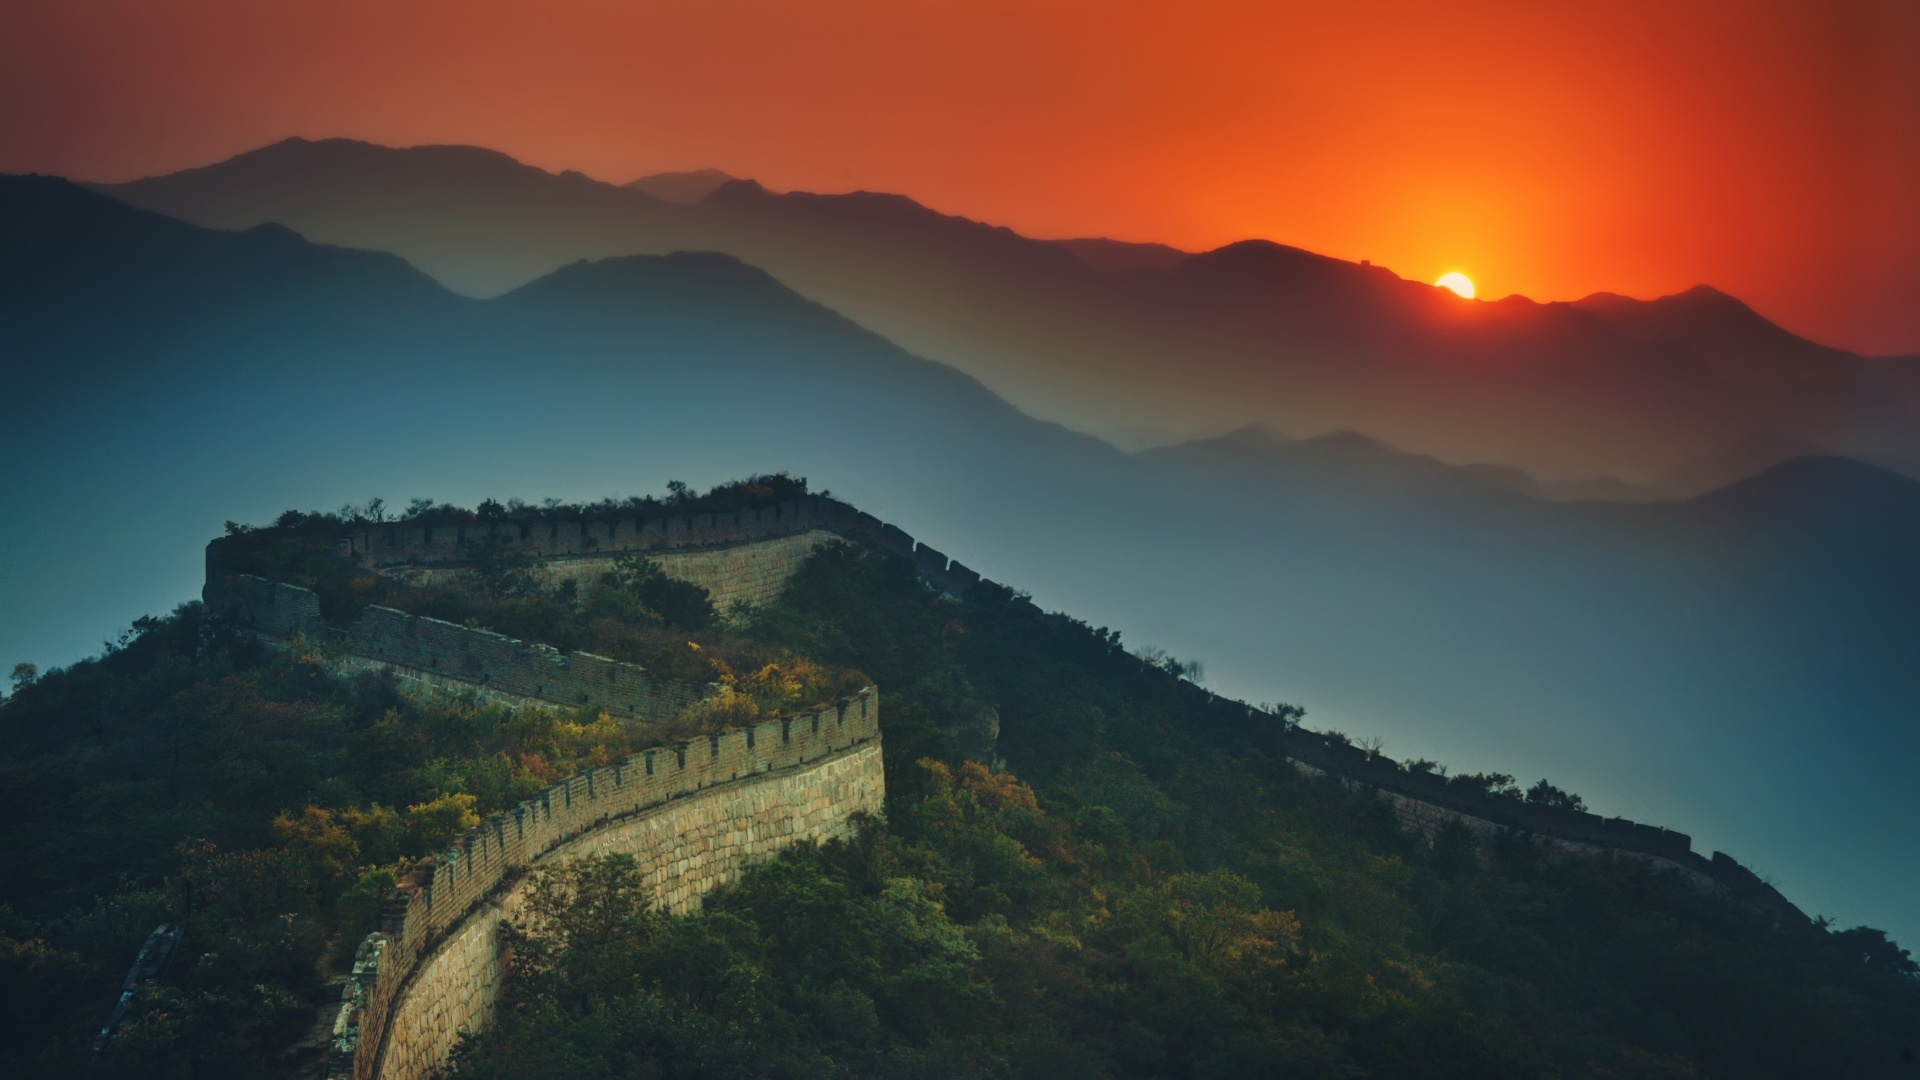 Great Wall of China: Was classified as one of the world's great national and historical sites by UNESCO in 1987. 1920x1080 Full HD Wallpaper.